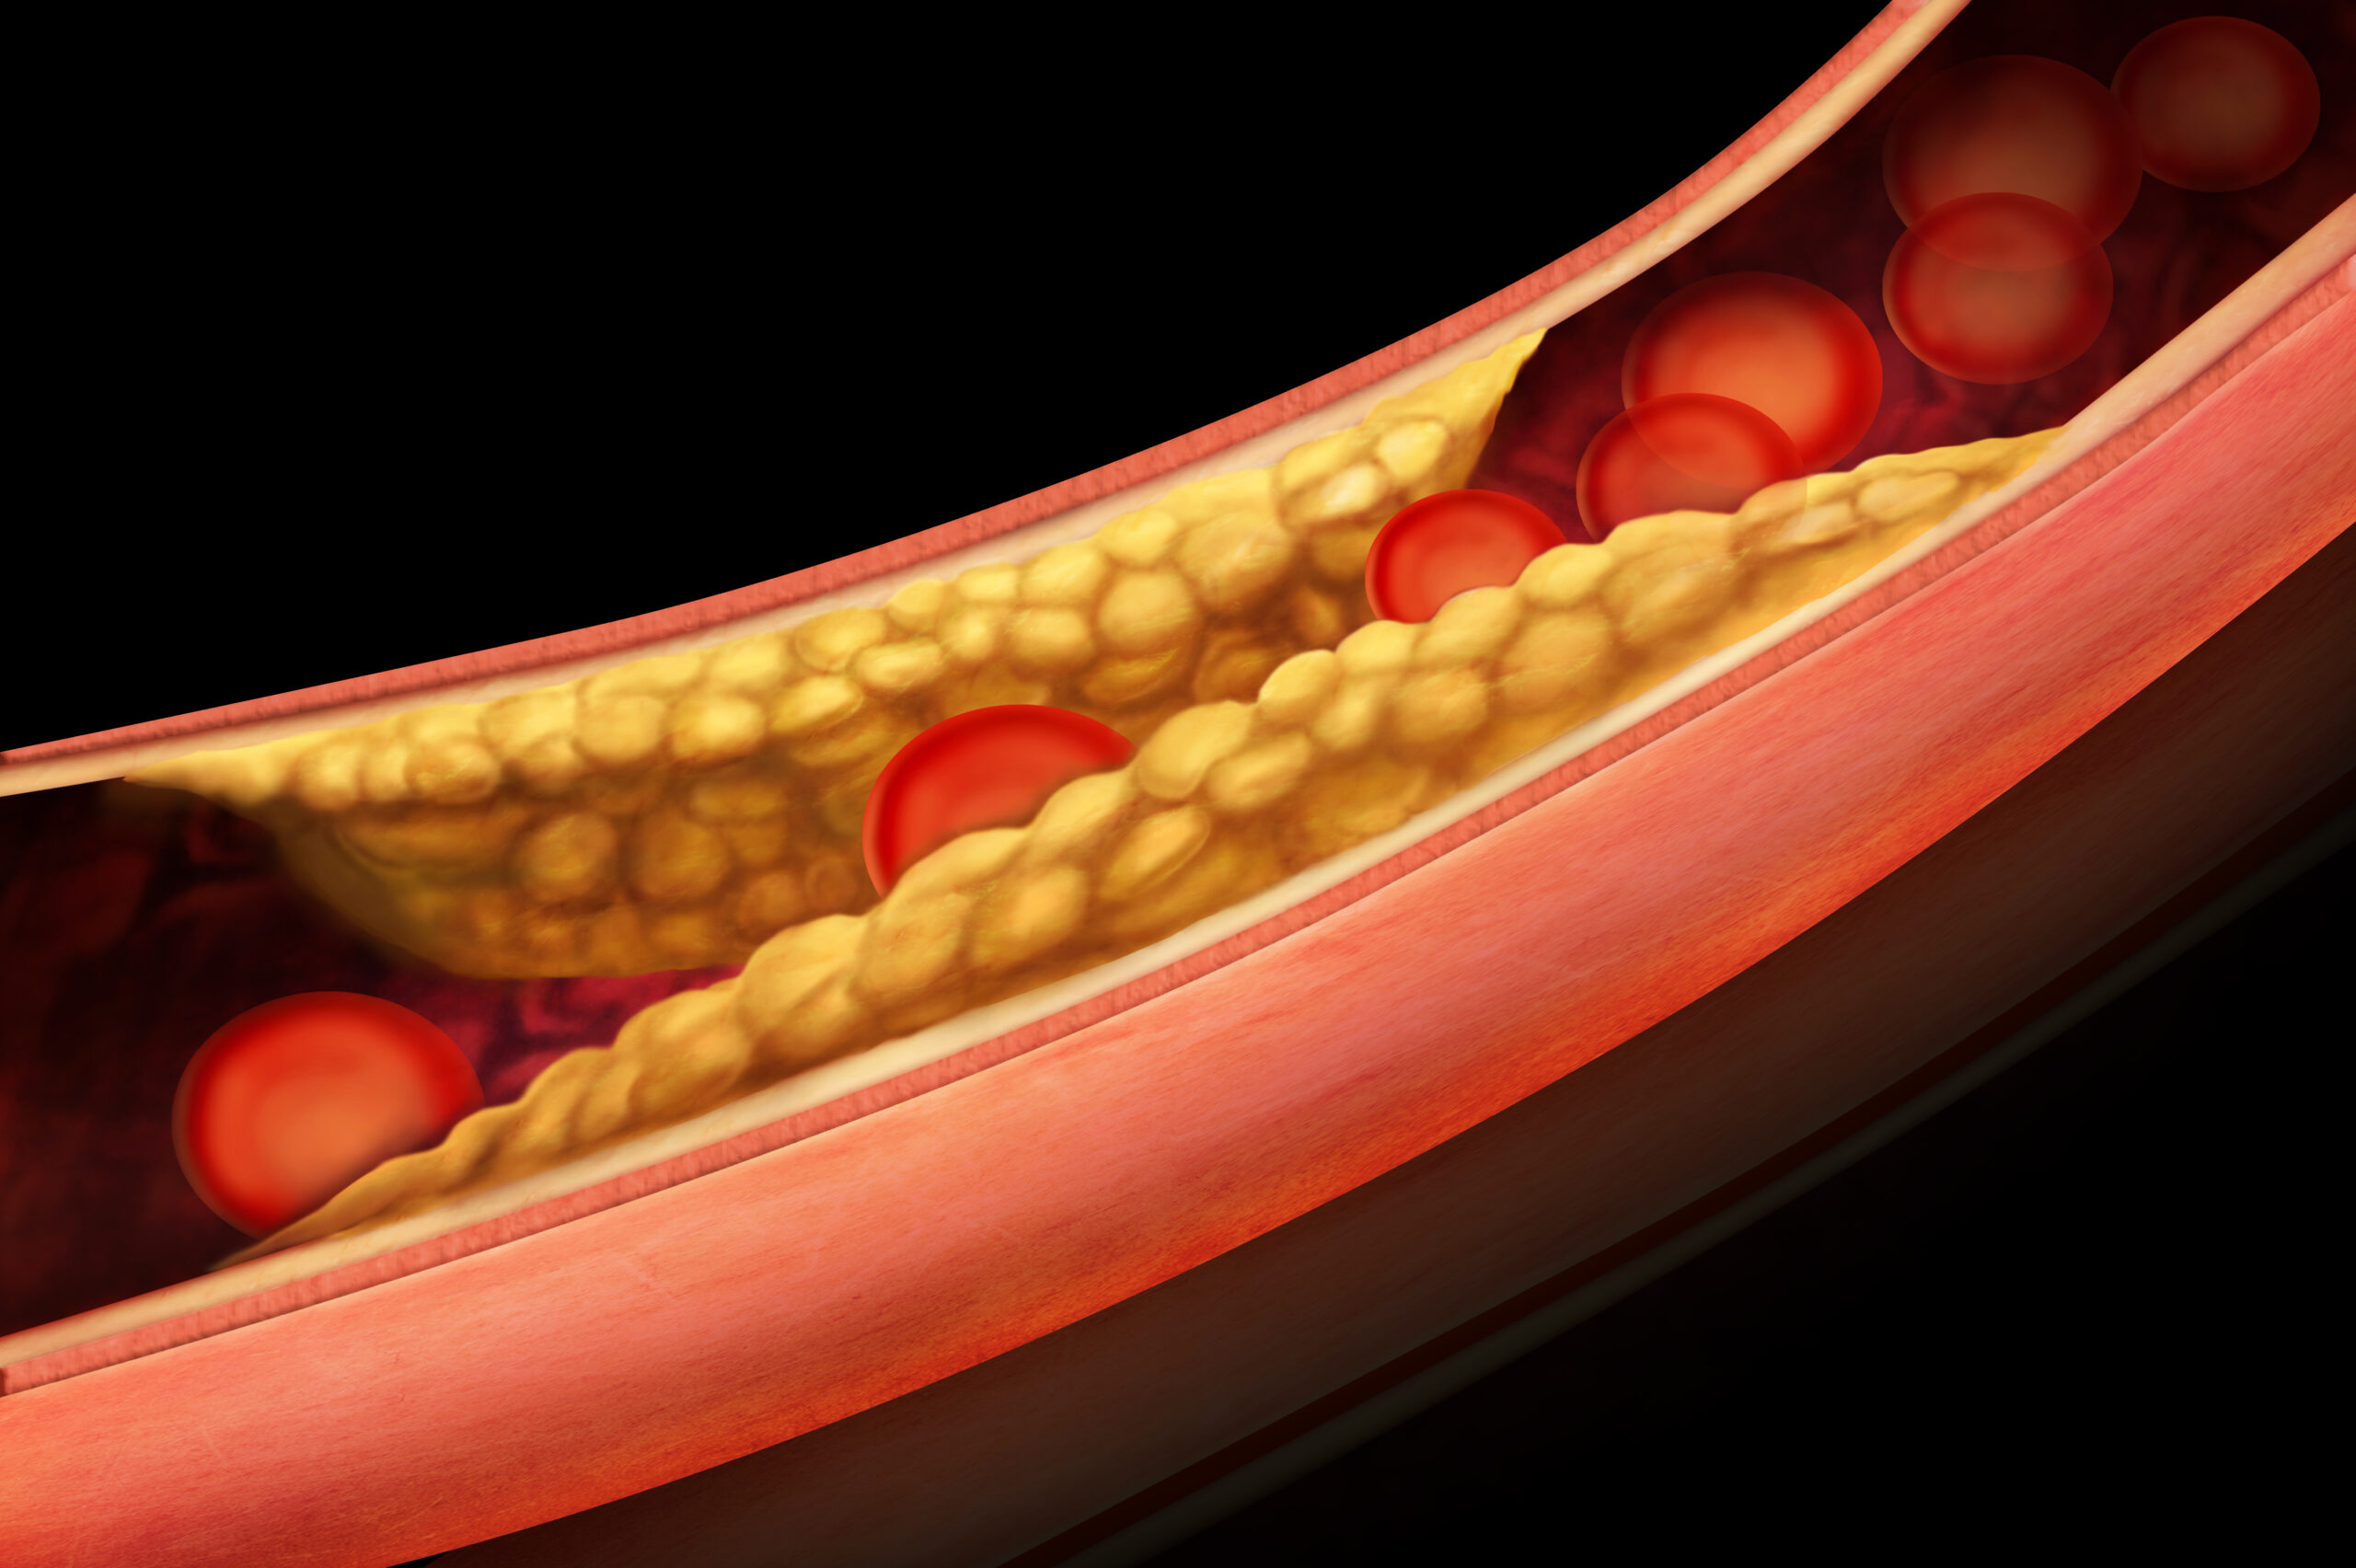 Atherosclerosis & Stroke Risk: How to Keep Your Arteries Clear